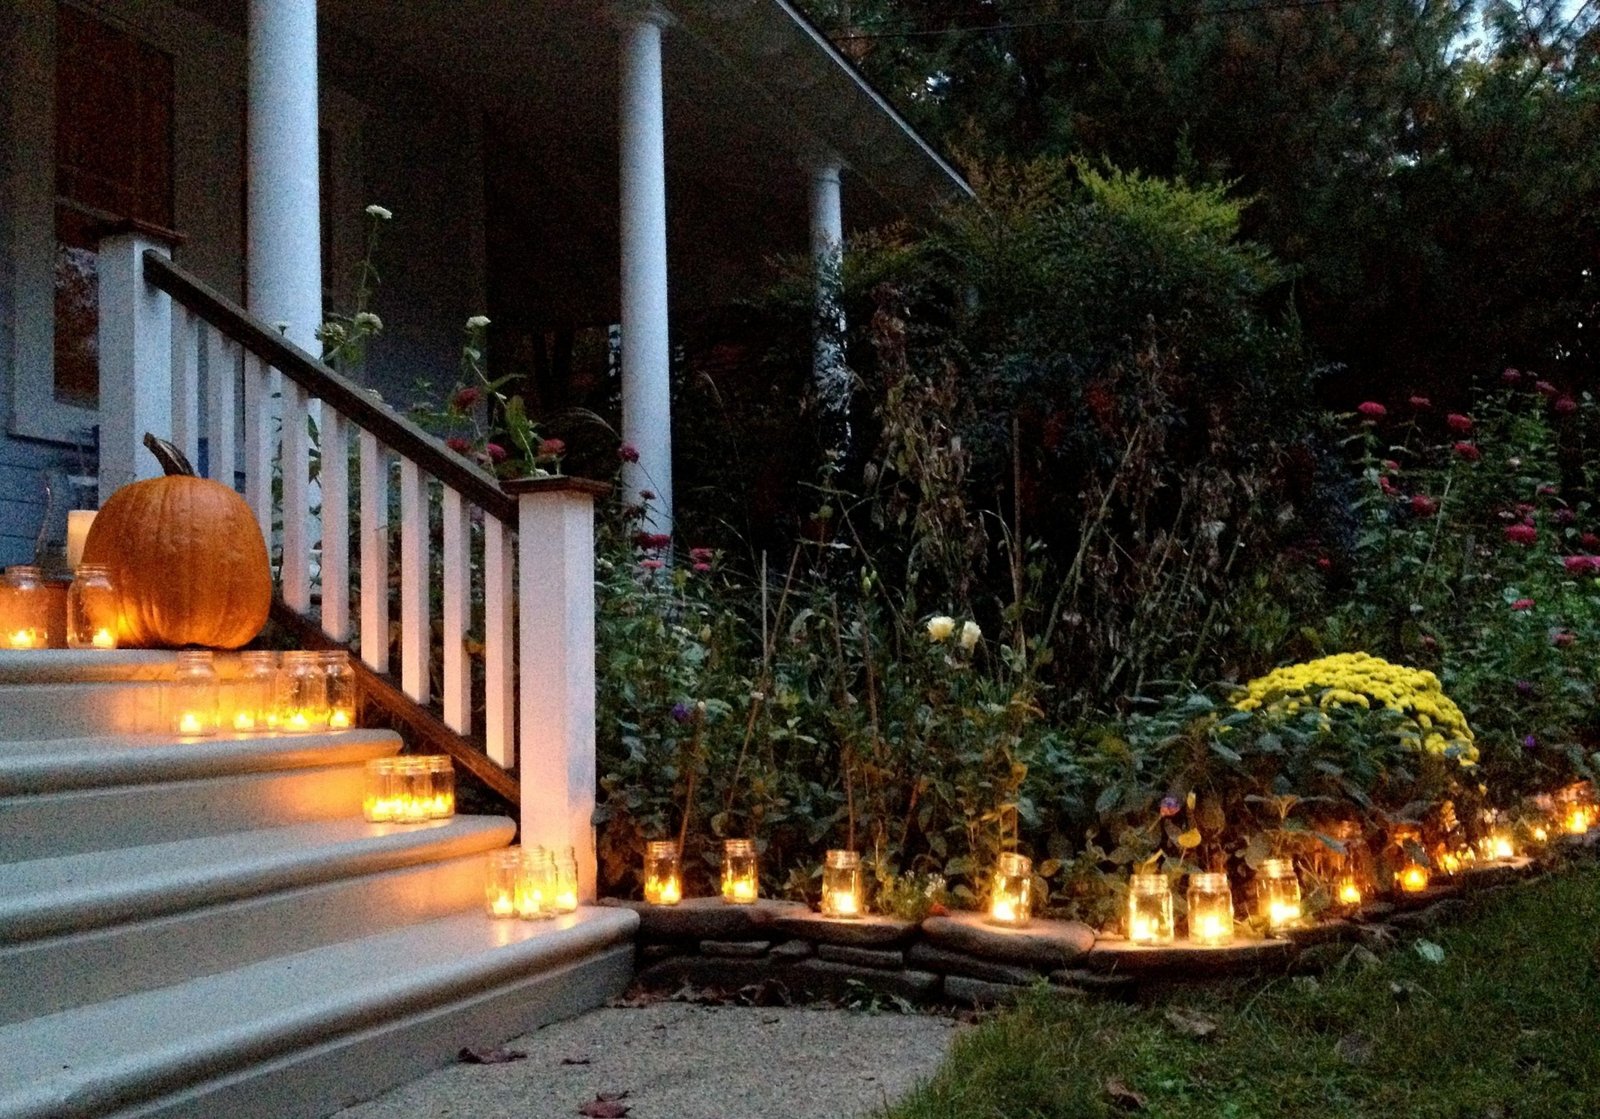 Classic decoration ideas for your house entrance that will give scaled